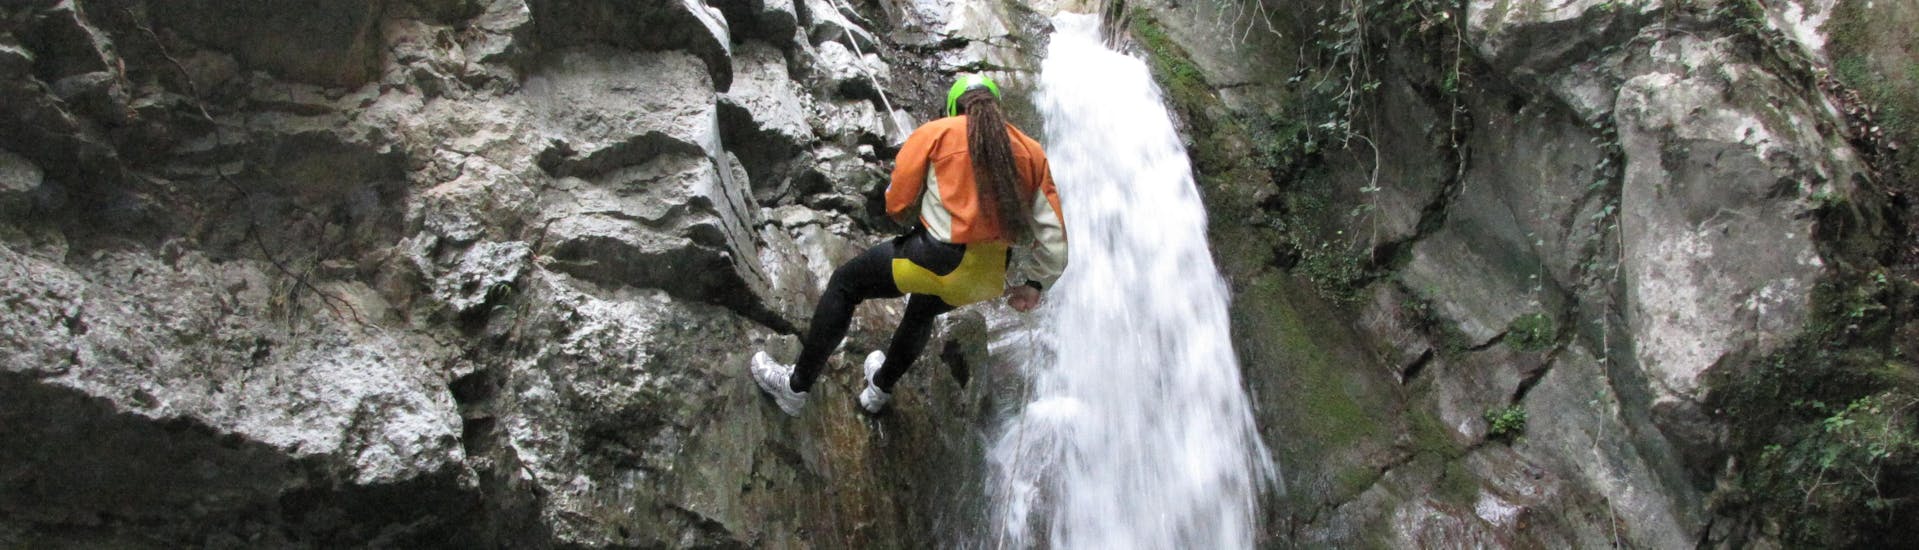 Gevorderde Canyoning in Papasidero - Lao.